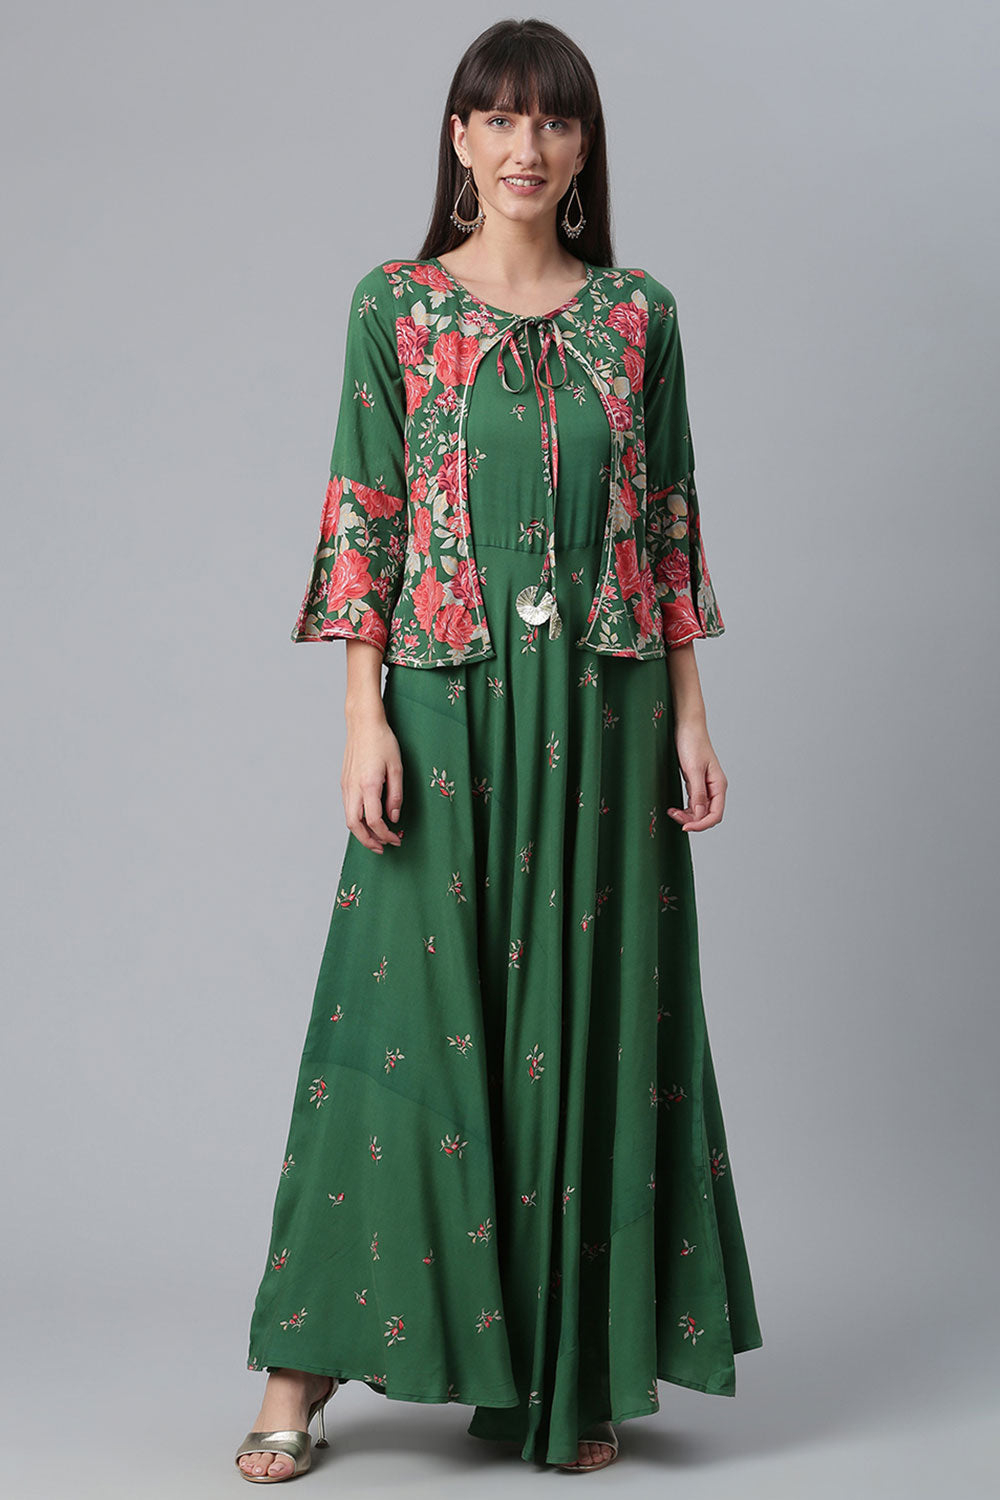 Buy Rayon Floral Printed Dress in Green